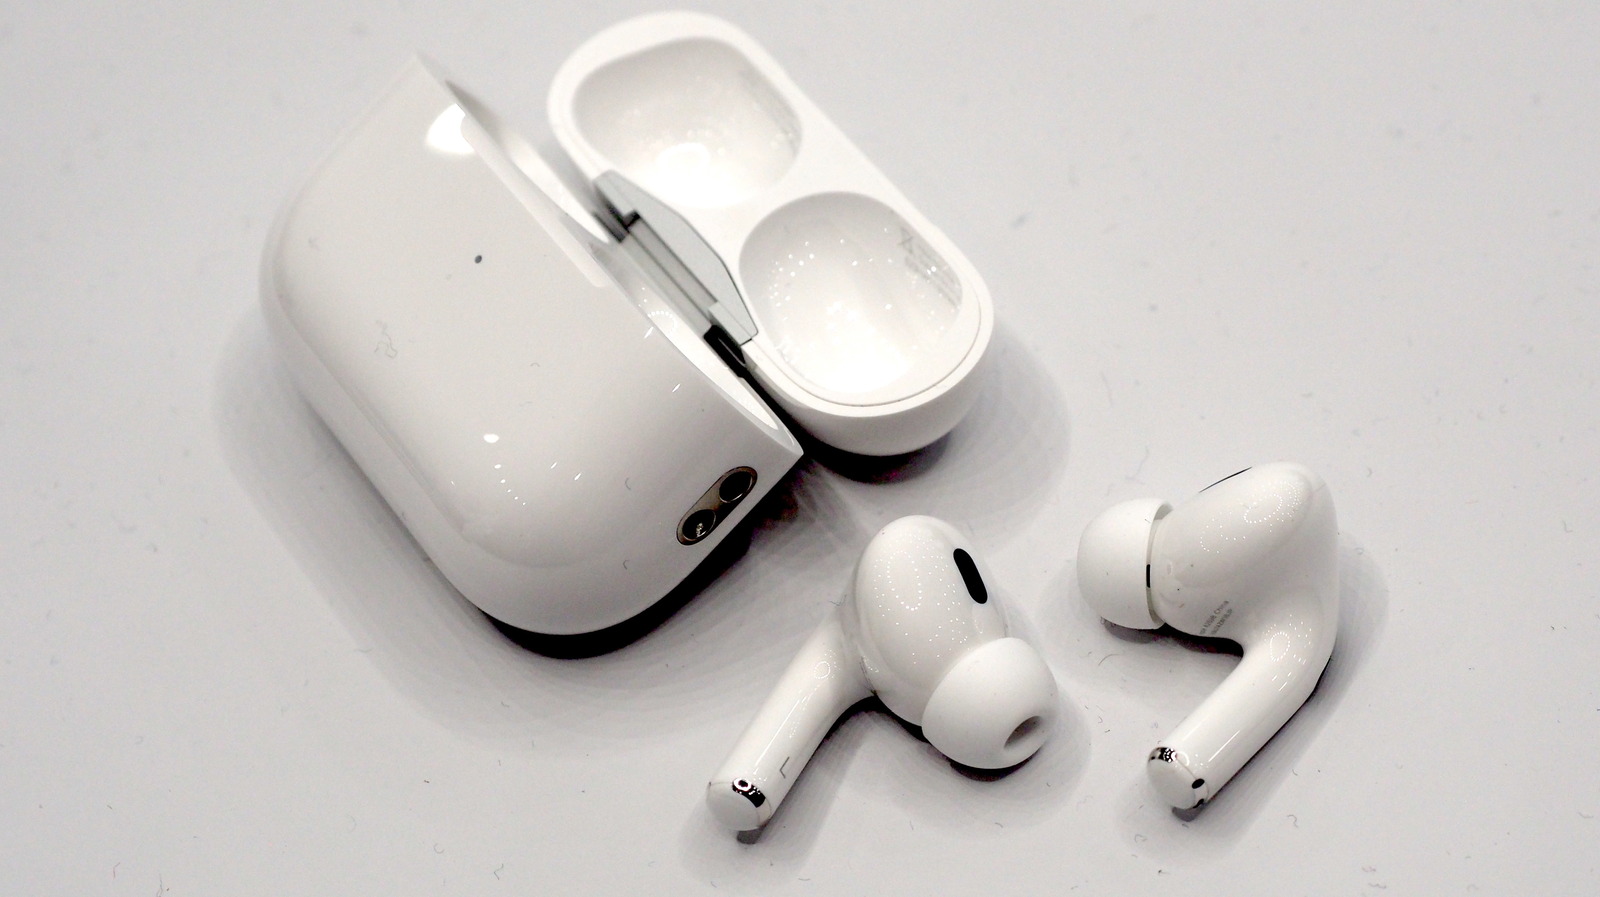 New AirPods Pro Hands-On: 2022's Update Focuses On Where It Matters